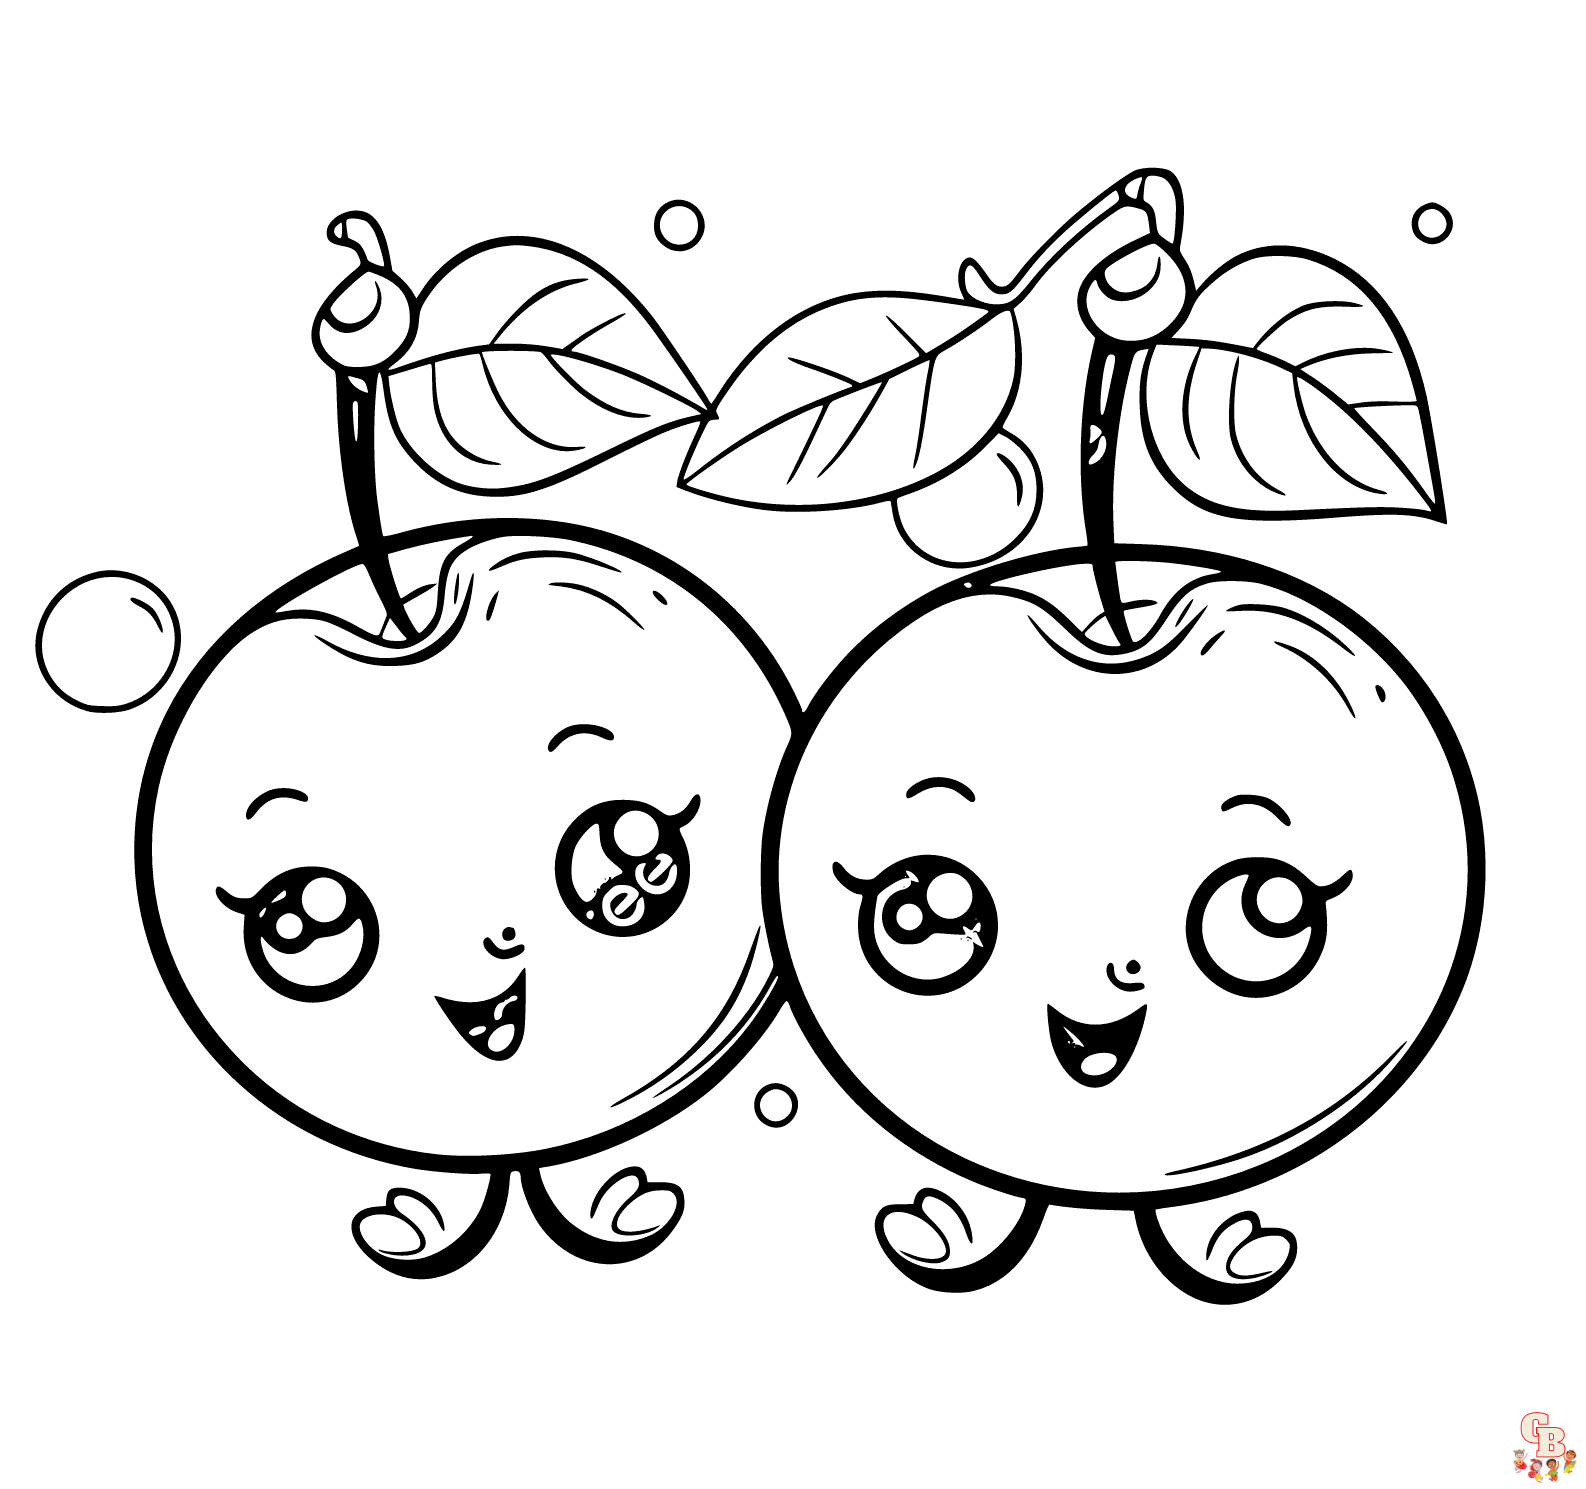 Cherry coloring pages to print